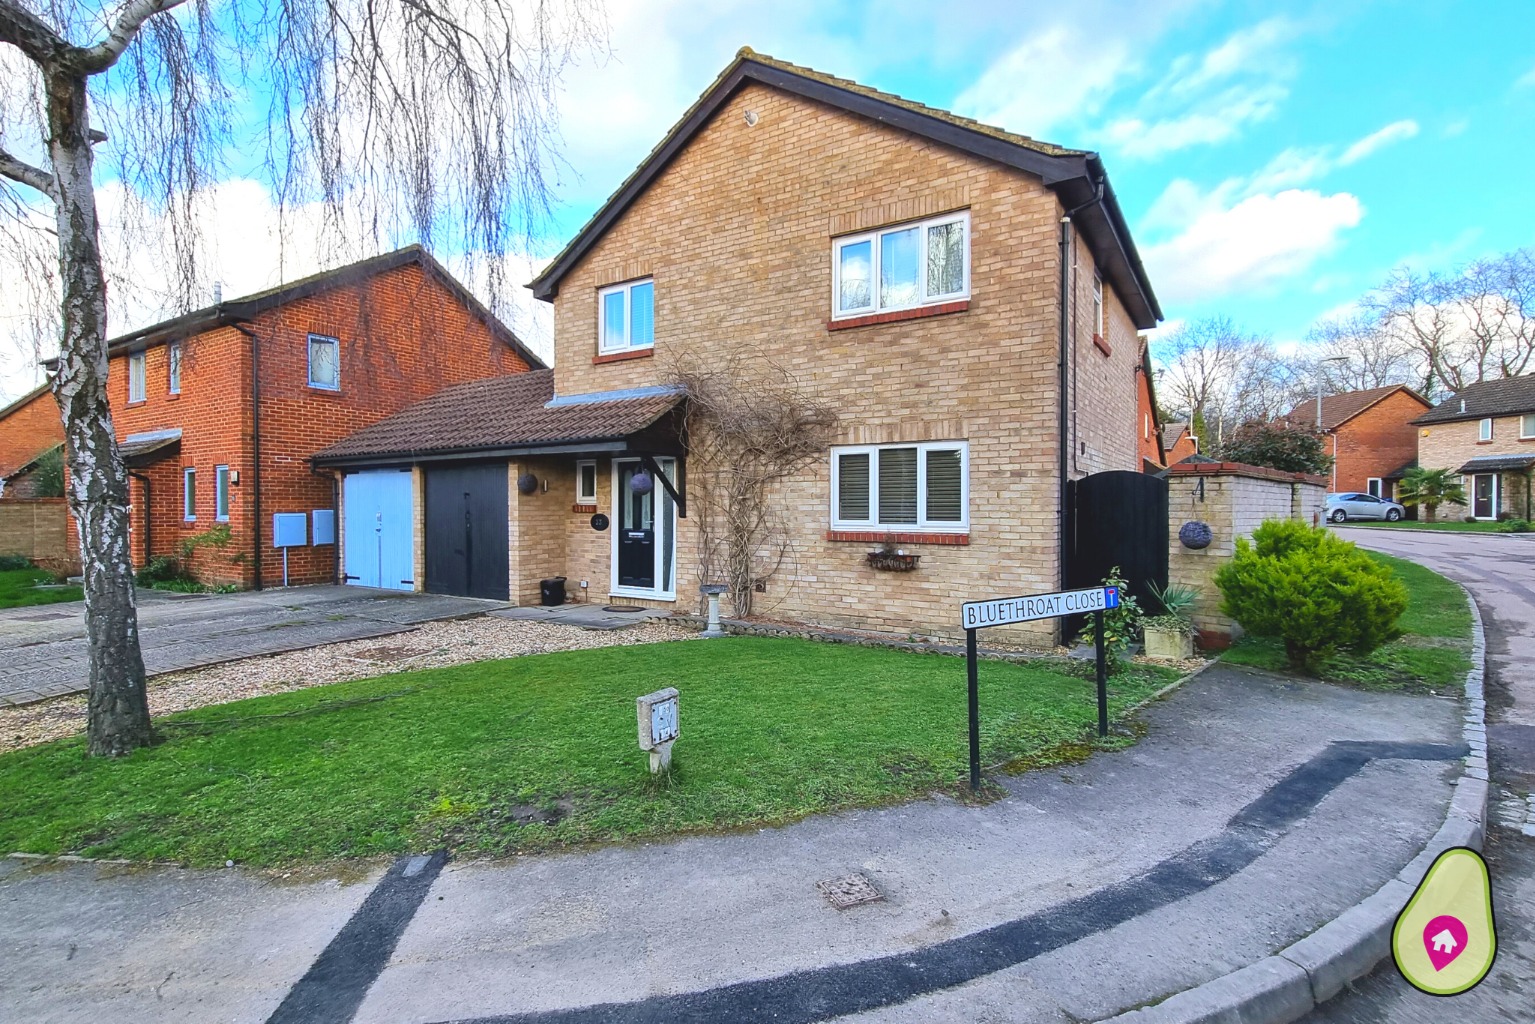 This is a well proportioned four bedroom family home, offering a corner plot with driveway parking and garage and in a great position.